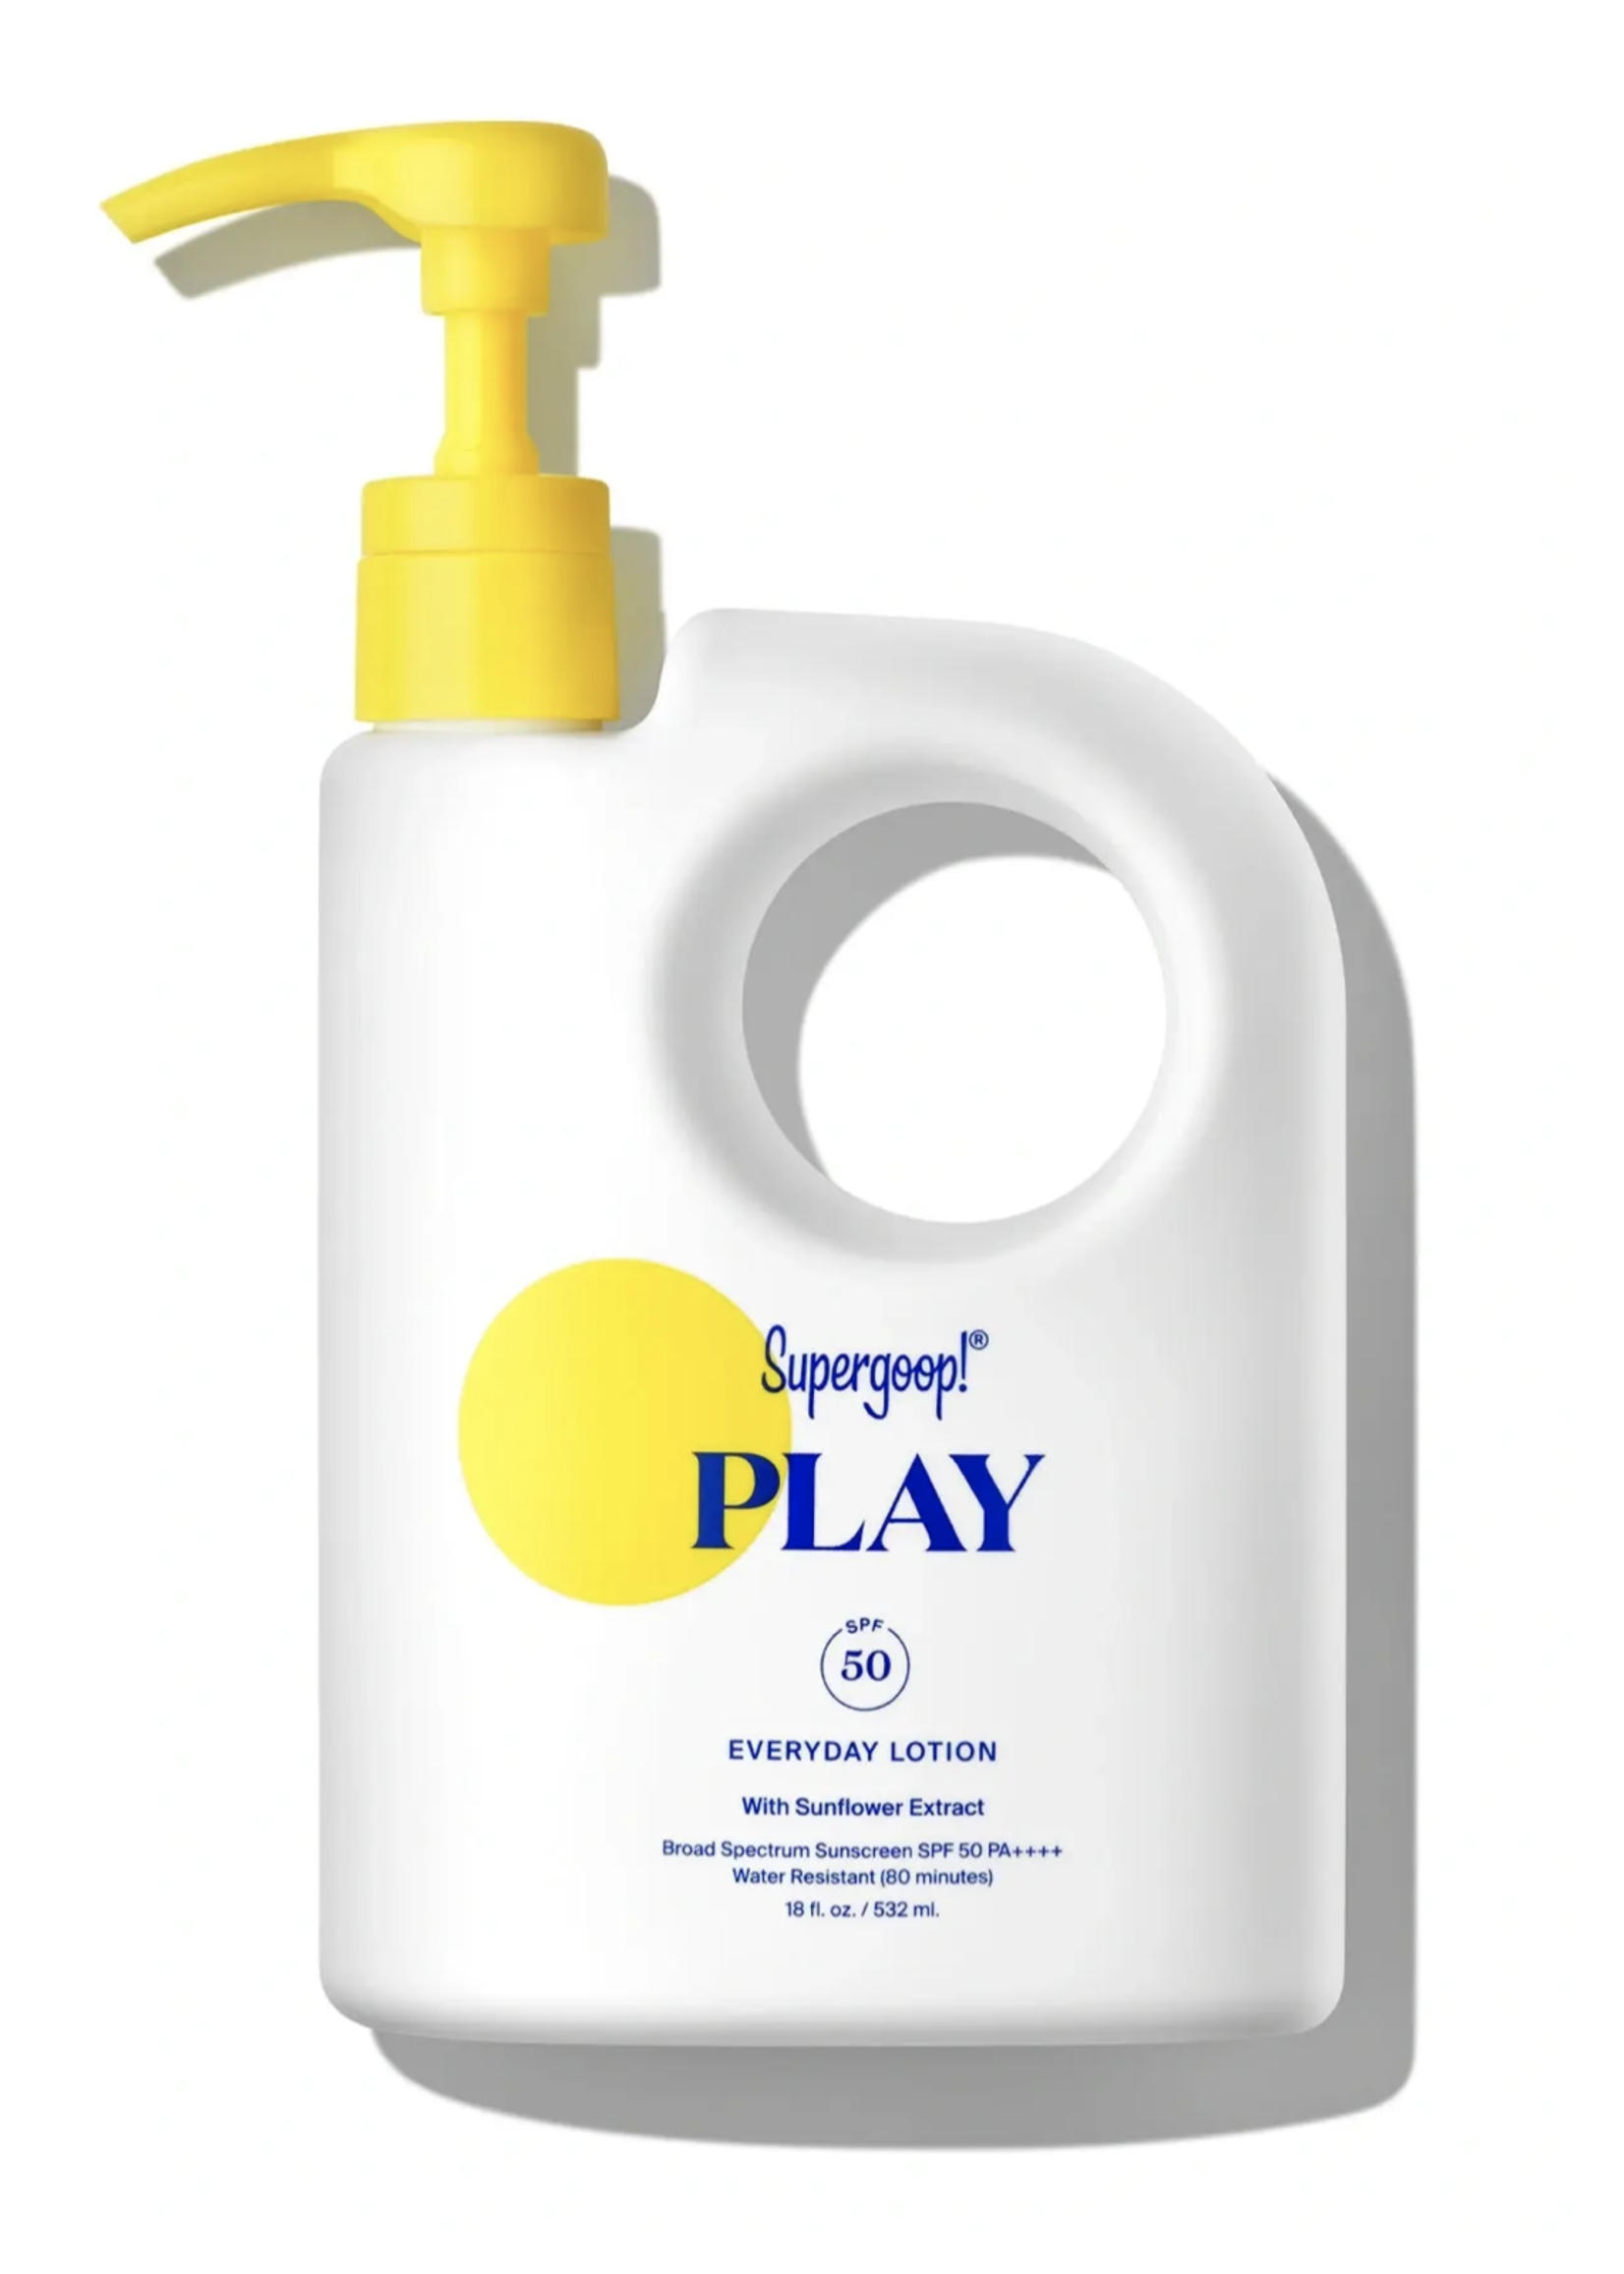 SUPERGOOP PLAY EVERYDAY LOTION SPF 50 WITH SUNFLOWER EXTRACT